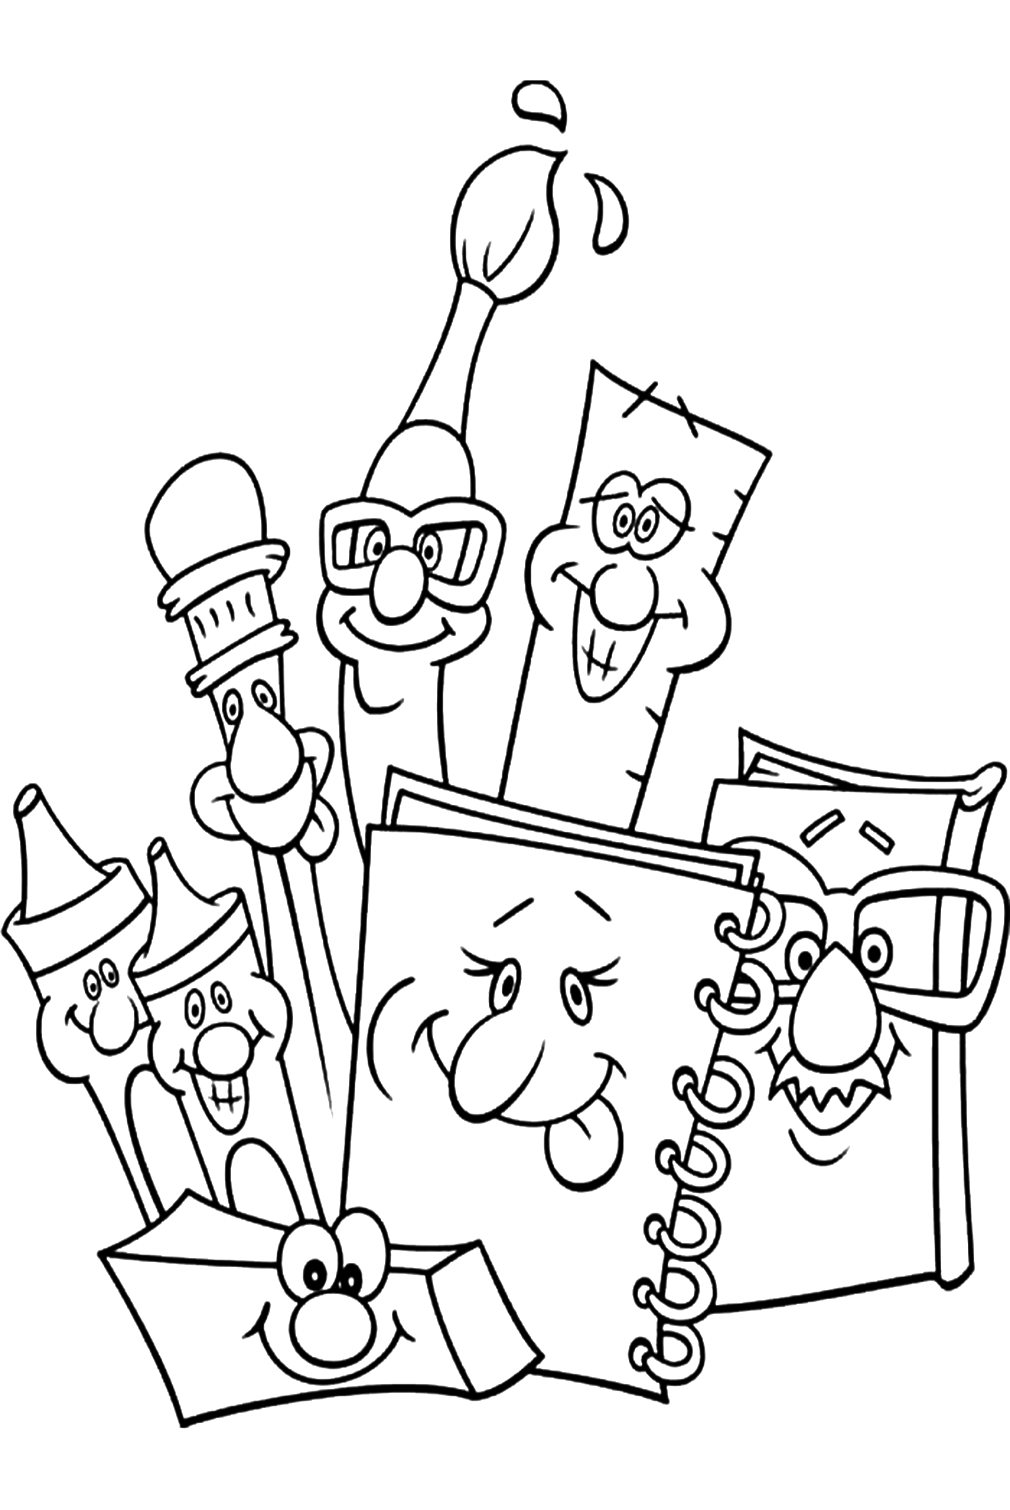 Cartoon Books On First Day Of School Coloring Page from First Day Of School